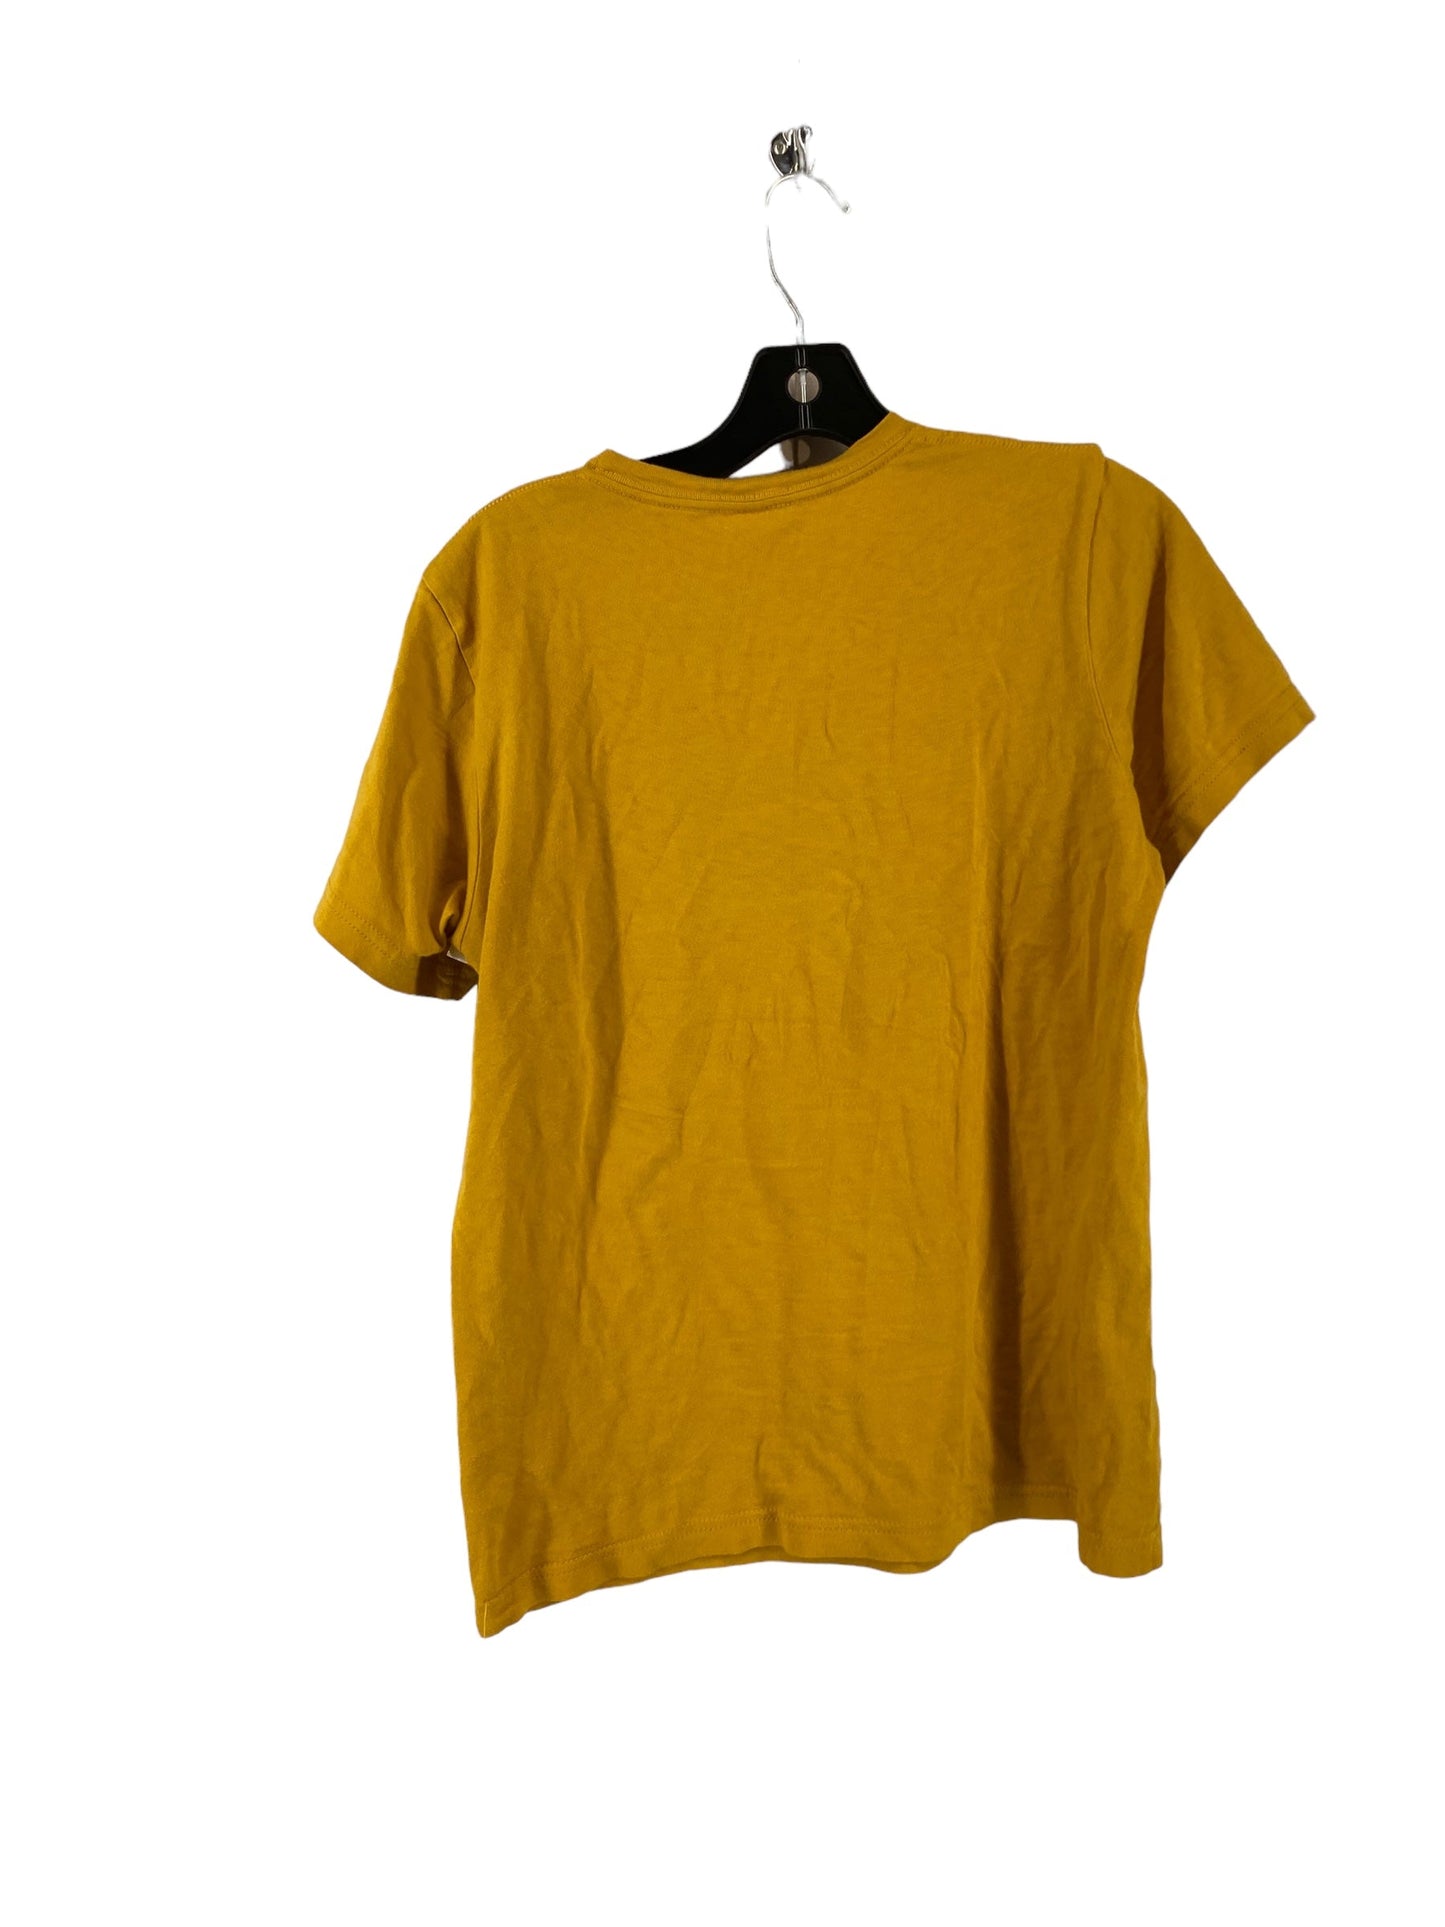 Yellow Top Short Sleeve Clothes Mentor, Size S